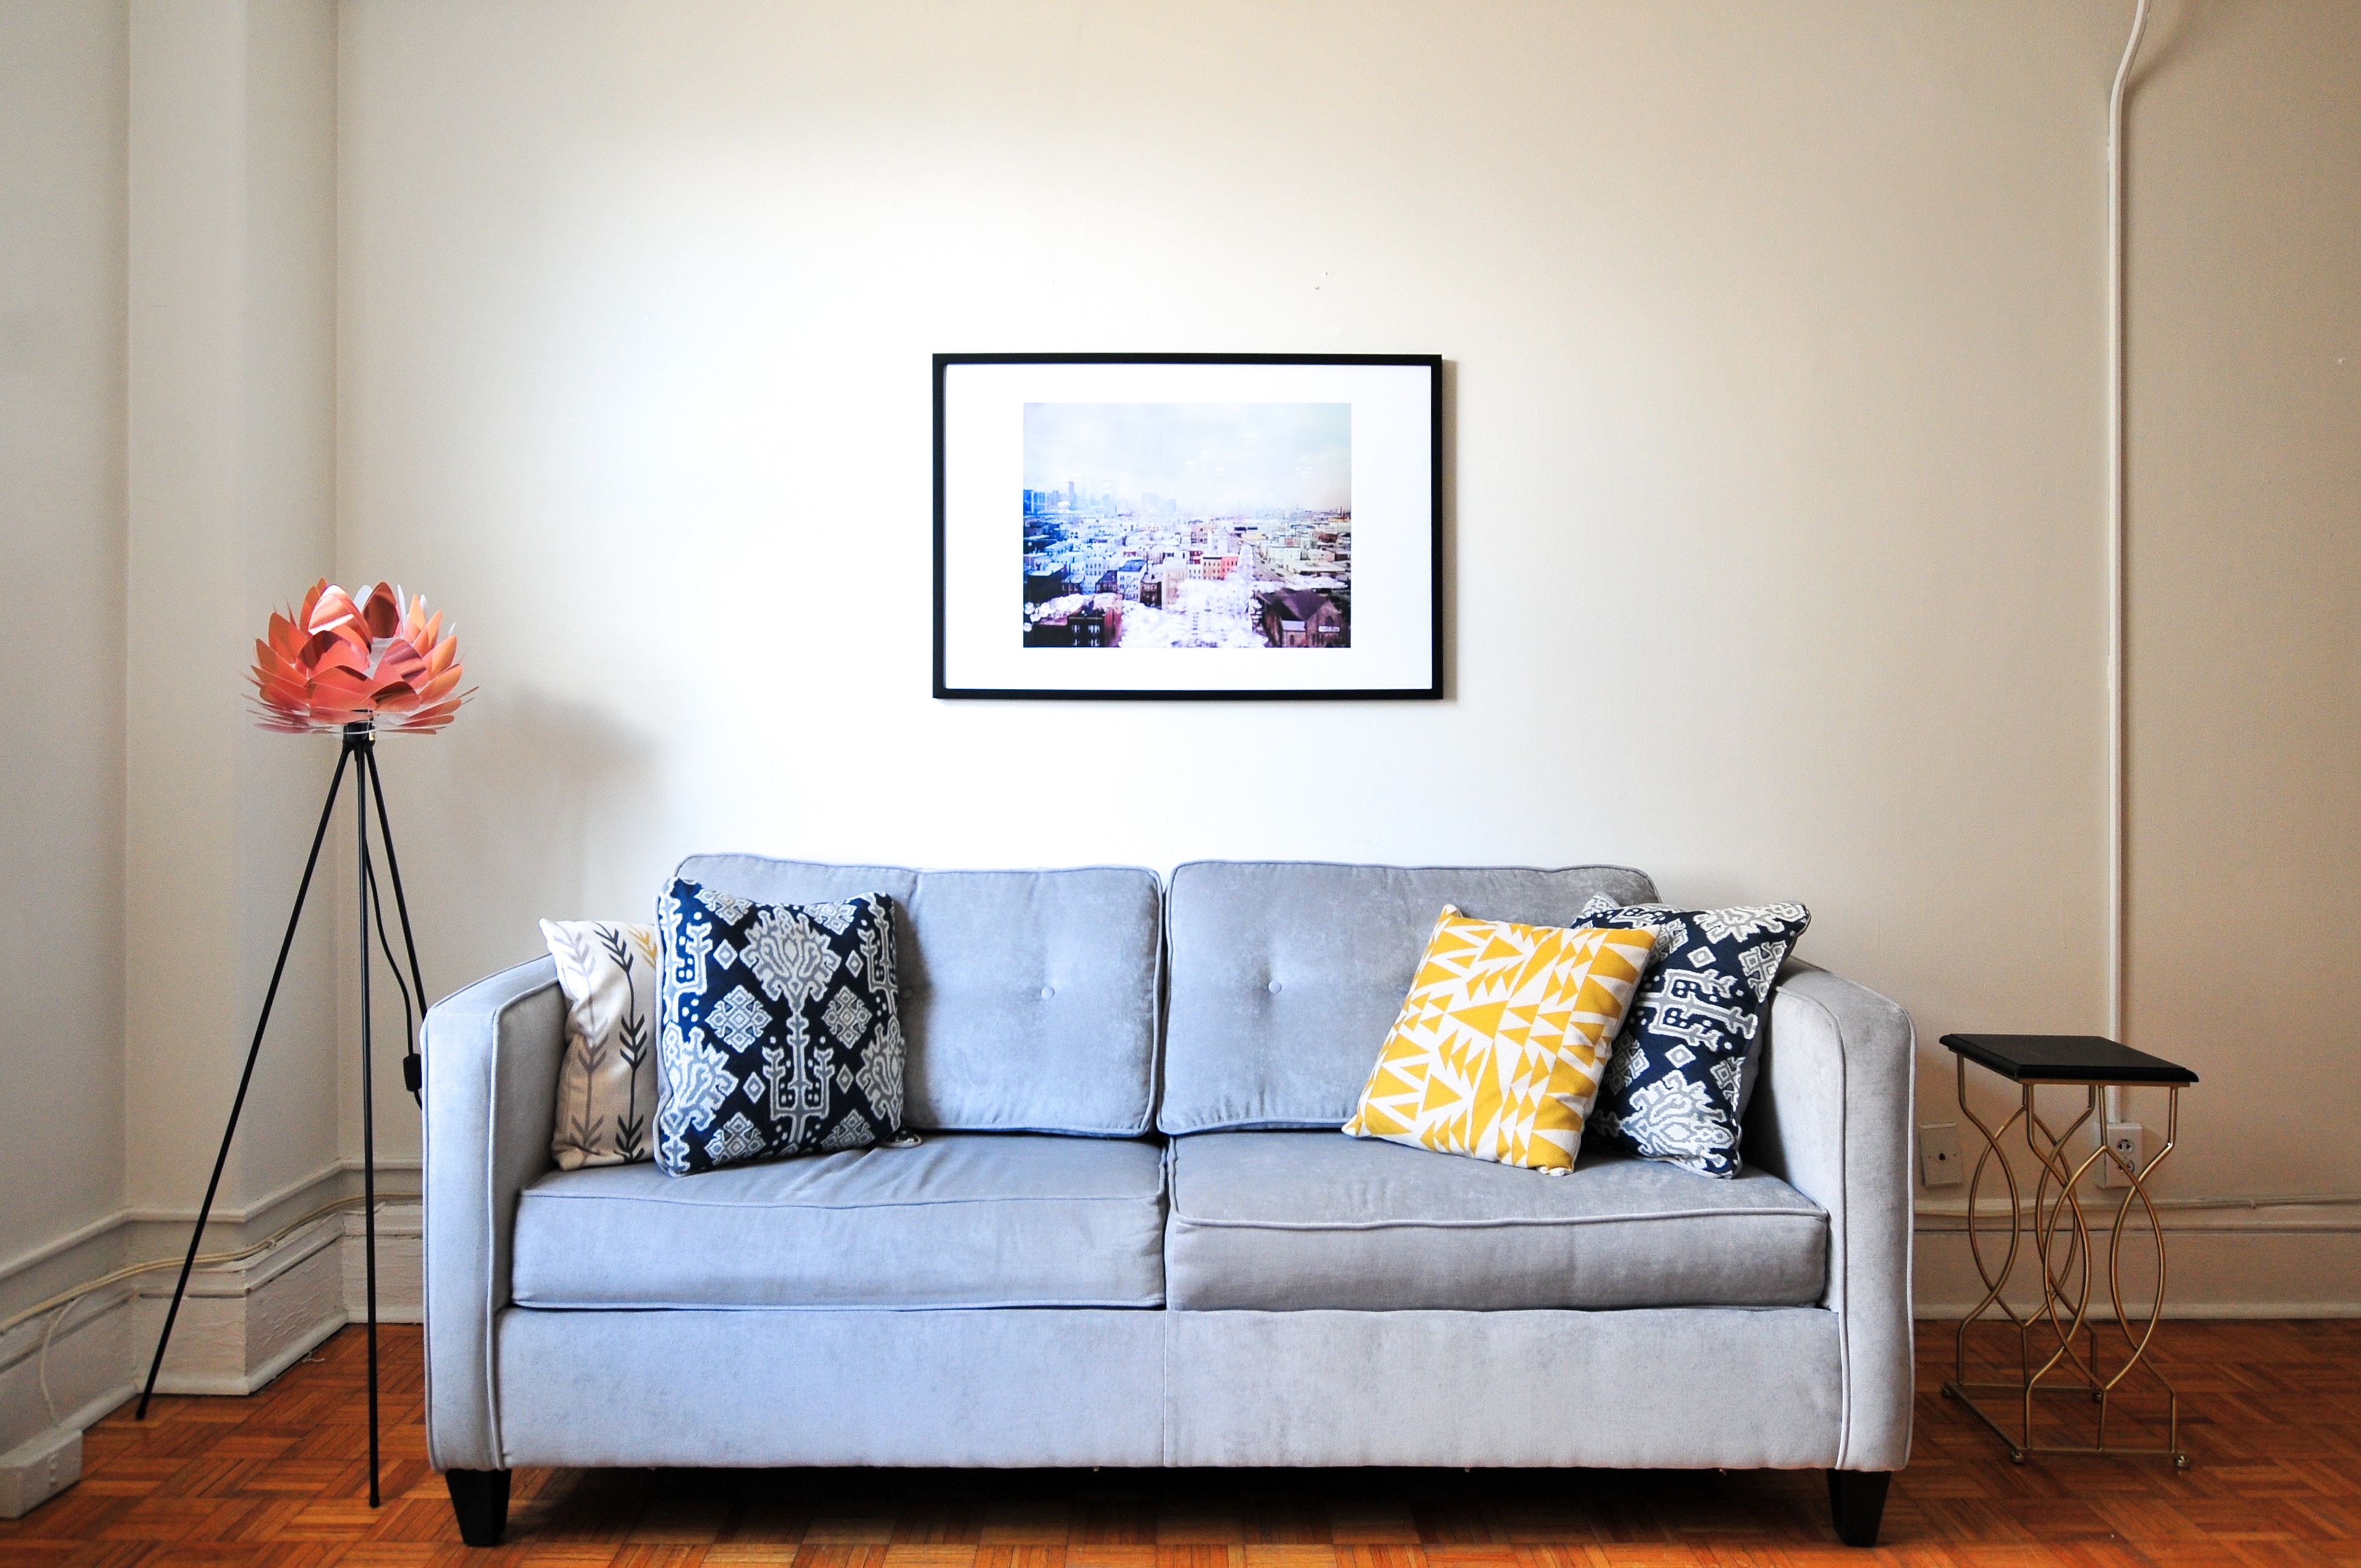 In order to move large items with ease like this sofa you need to know what you are doing